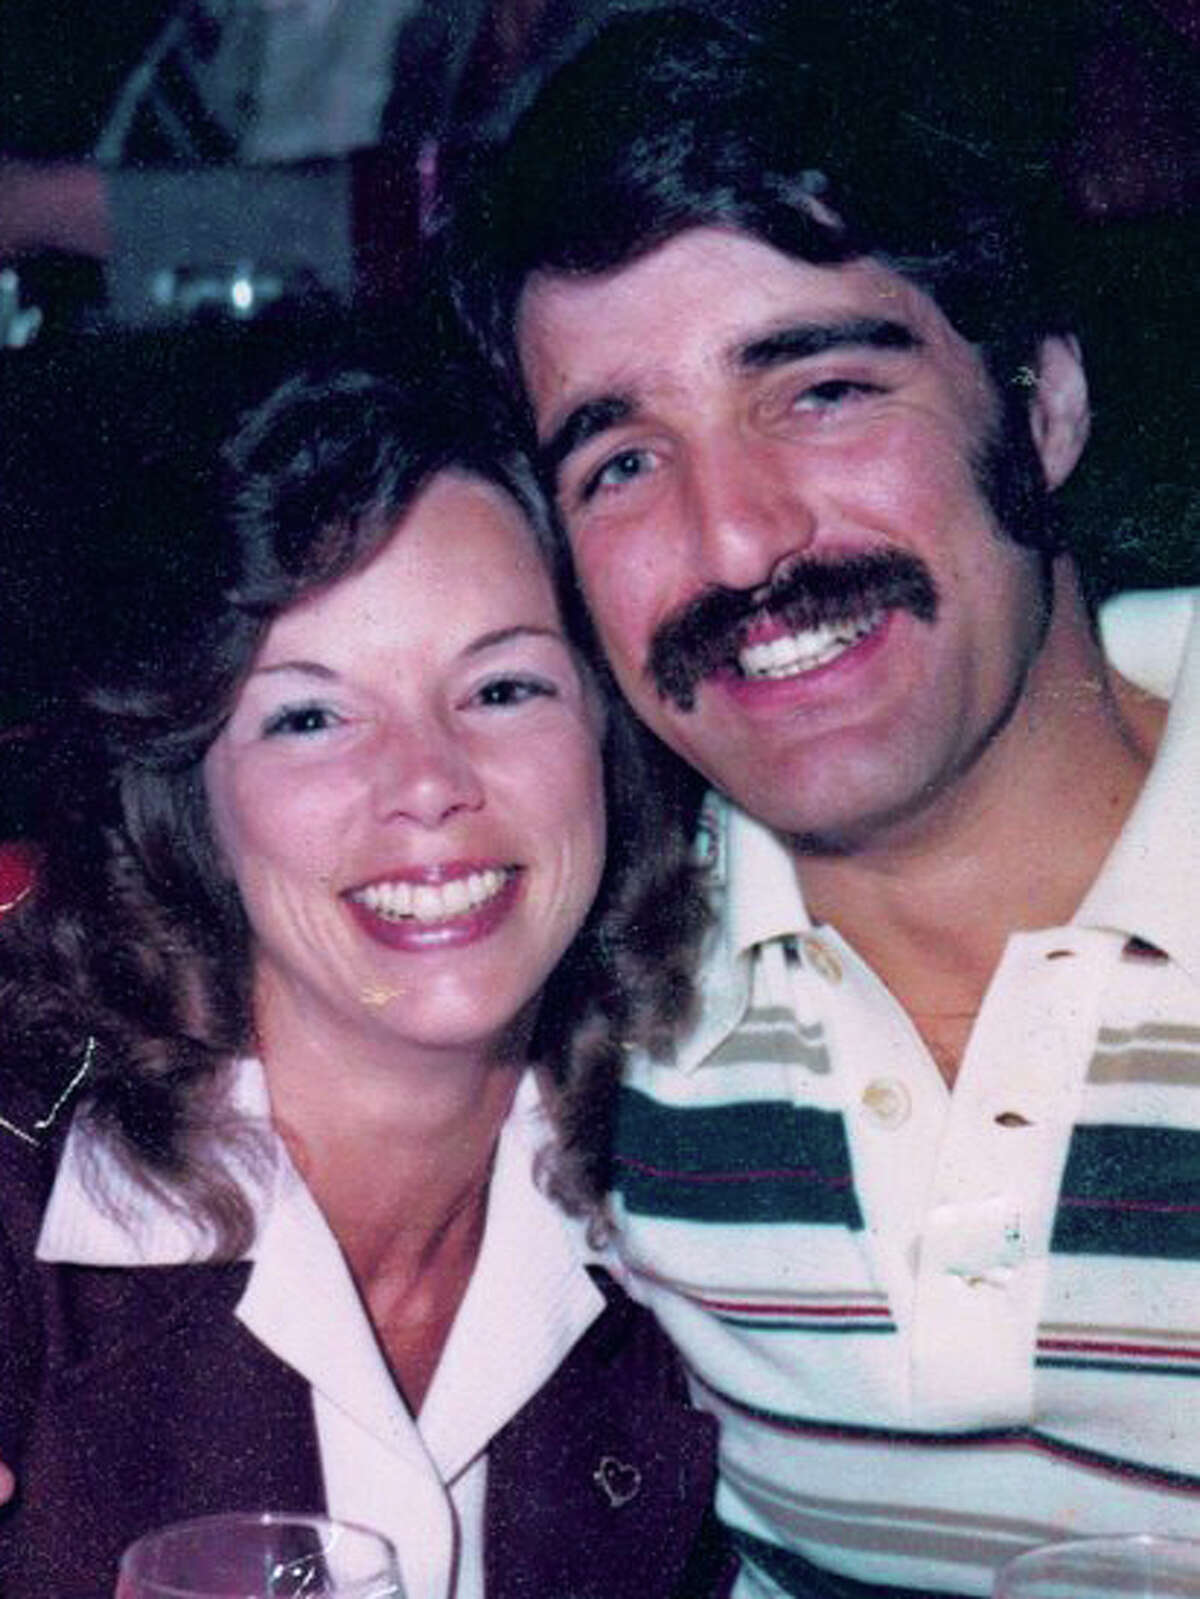 Cheri Domingo, 35, and Greg Sanchez, 27, were murdered in a home near Goleta in 1981. Police say DNA collected at the scene links Joseph DeAngelo to the crime.